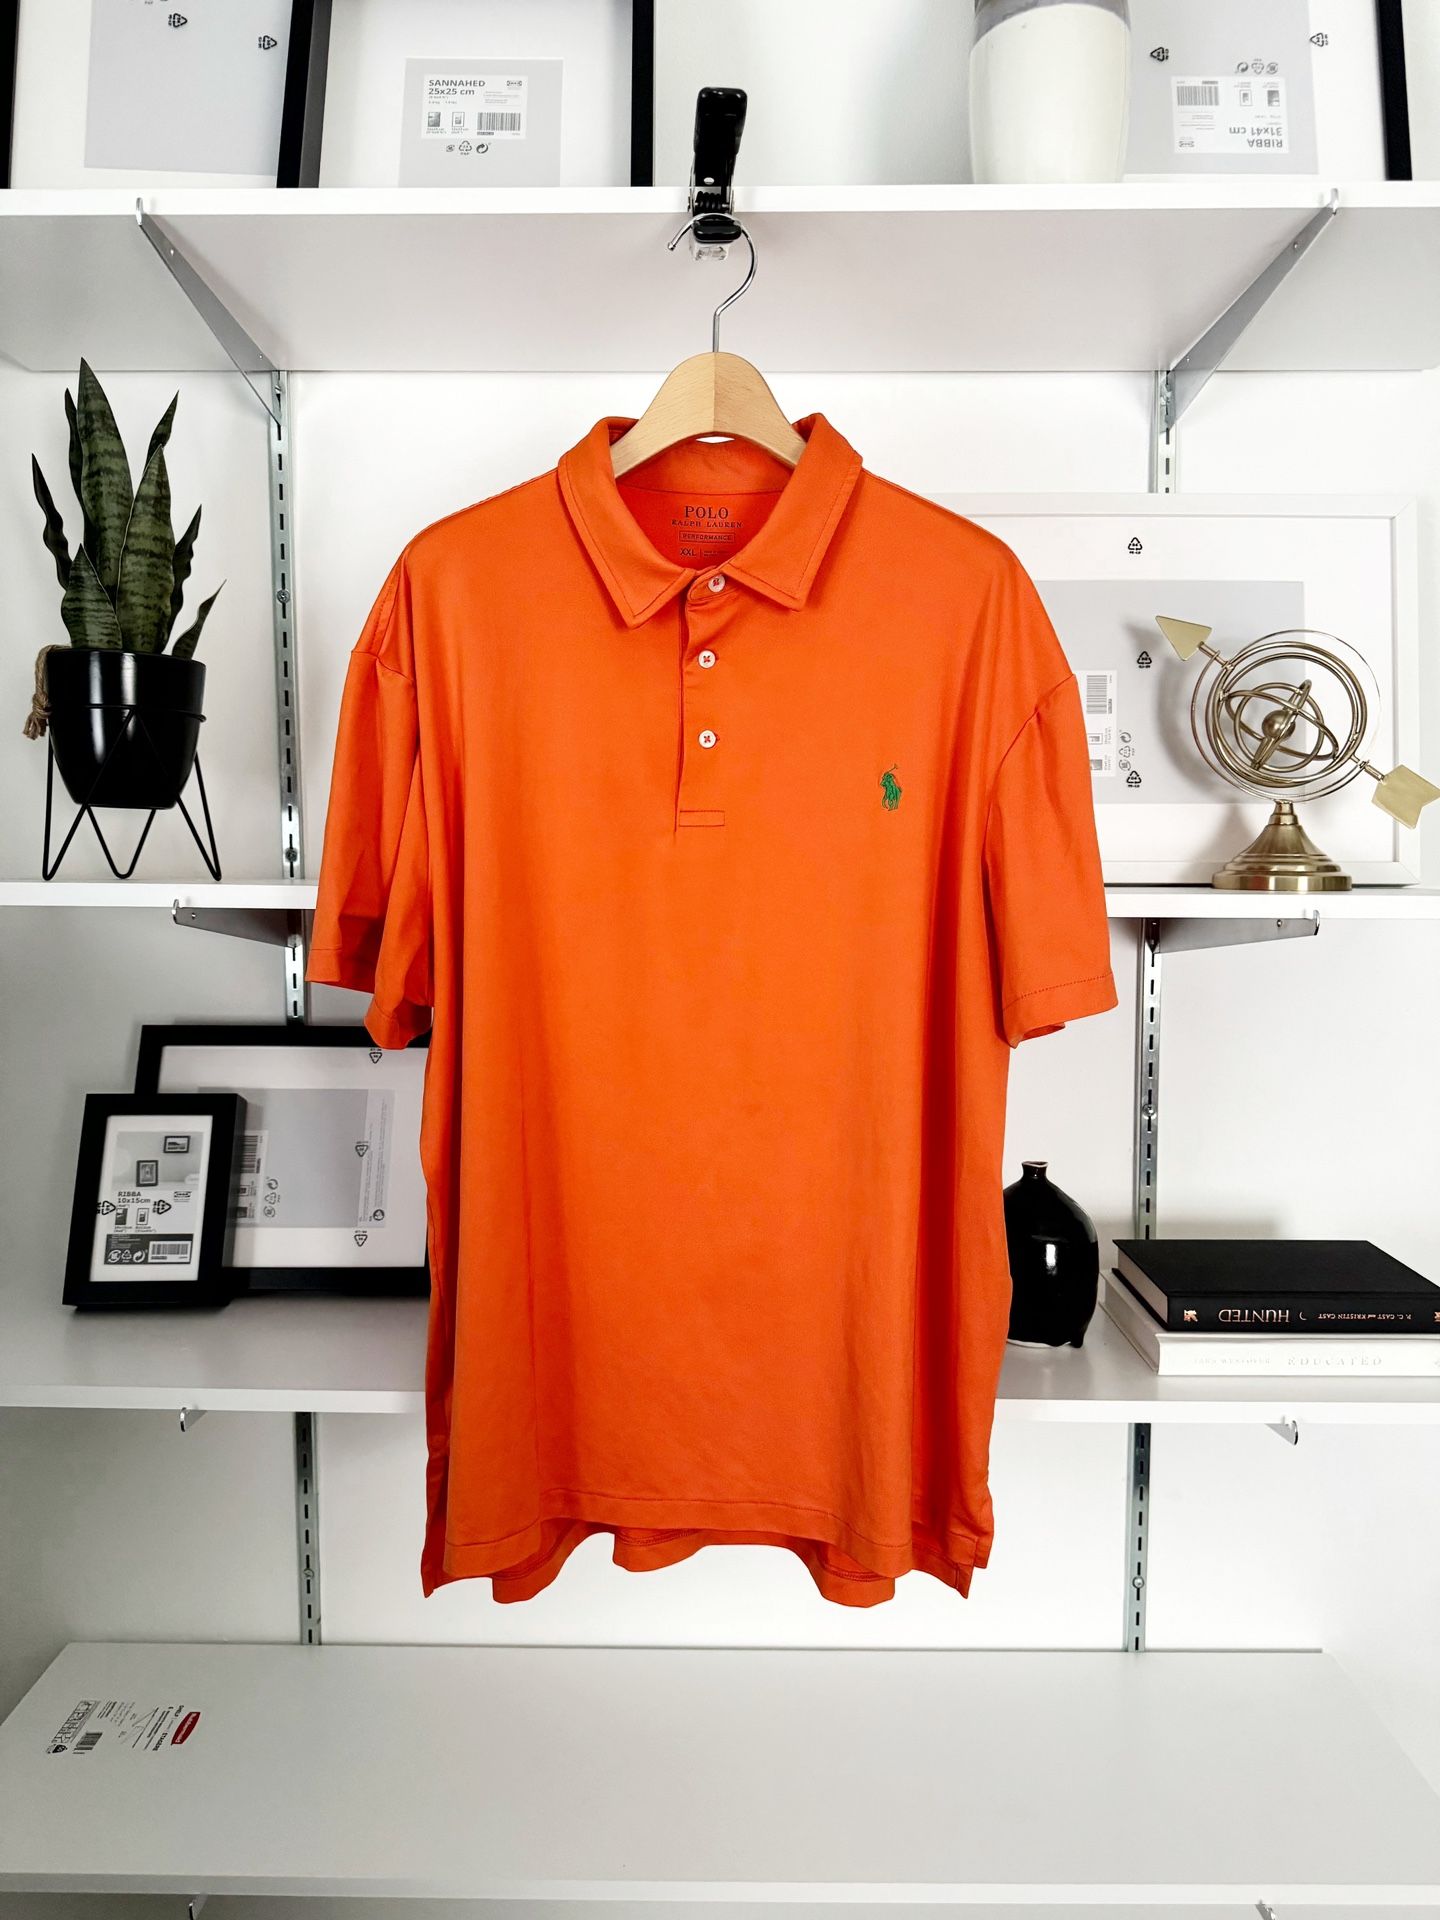 New! Men's Polo Ralph Lauren performance shirt. Retail $128. Size 2XL. Color Orange. Brand new without tags